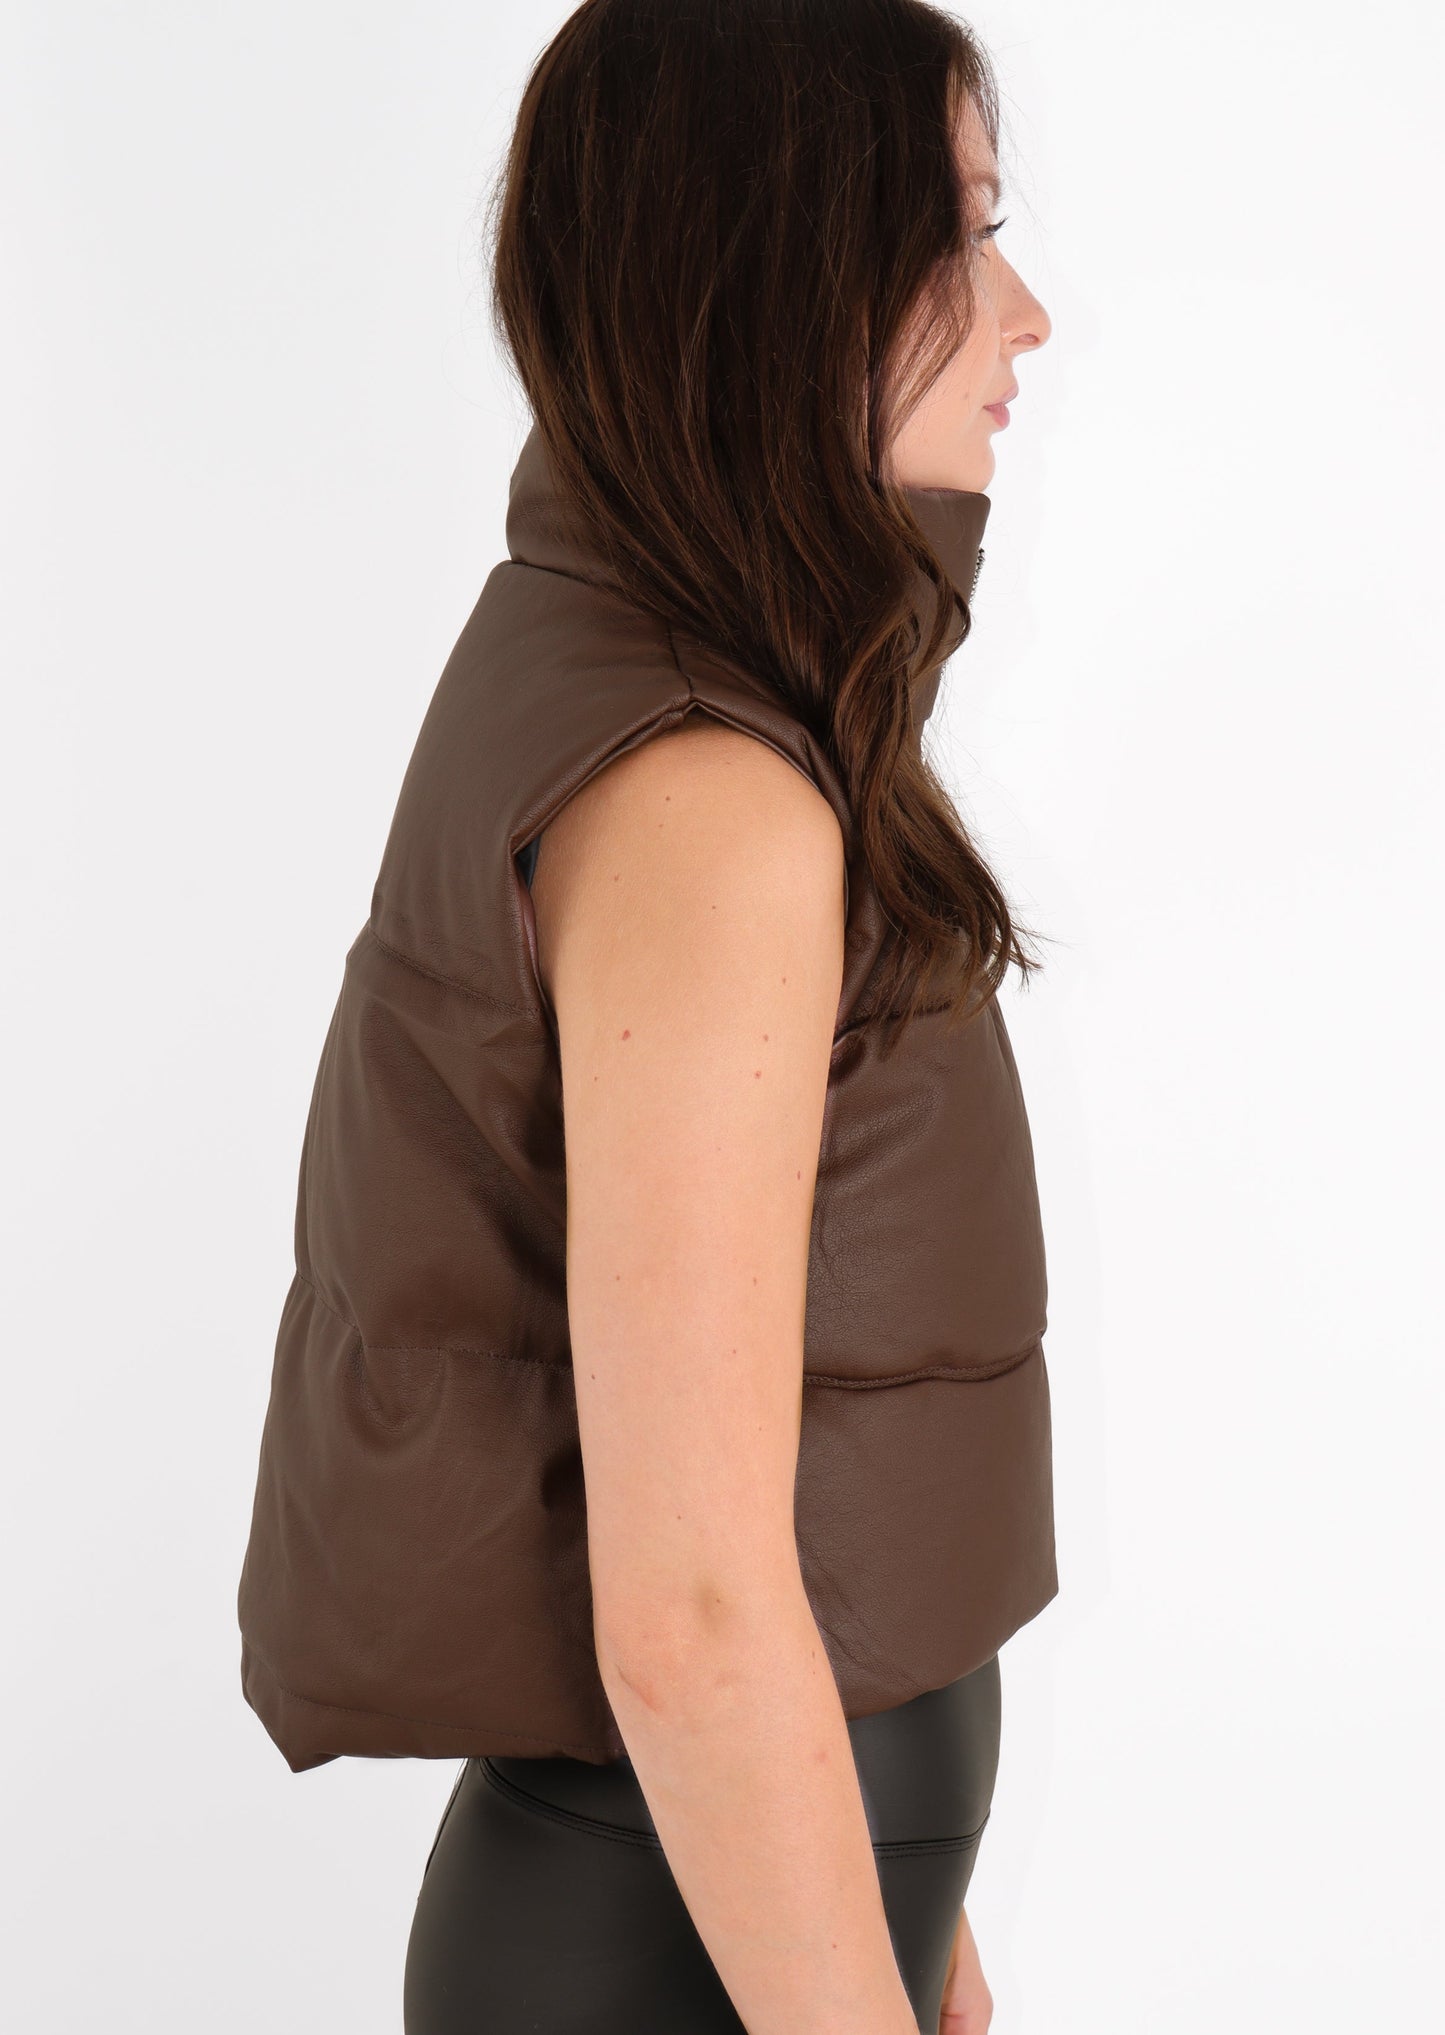 Brown Cropped Faux Leather Puffer Gilet